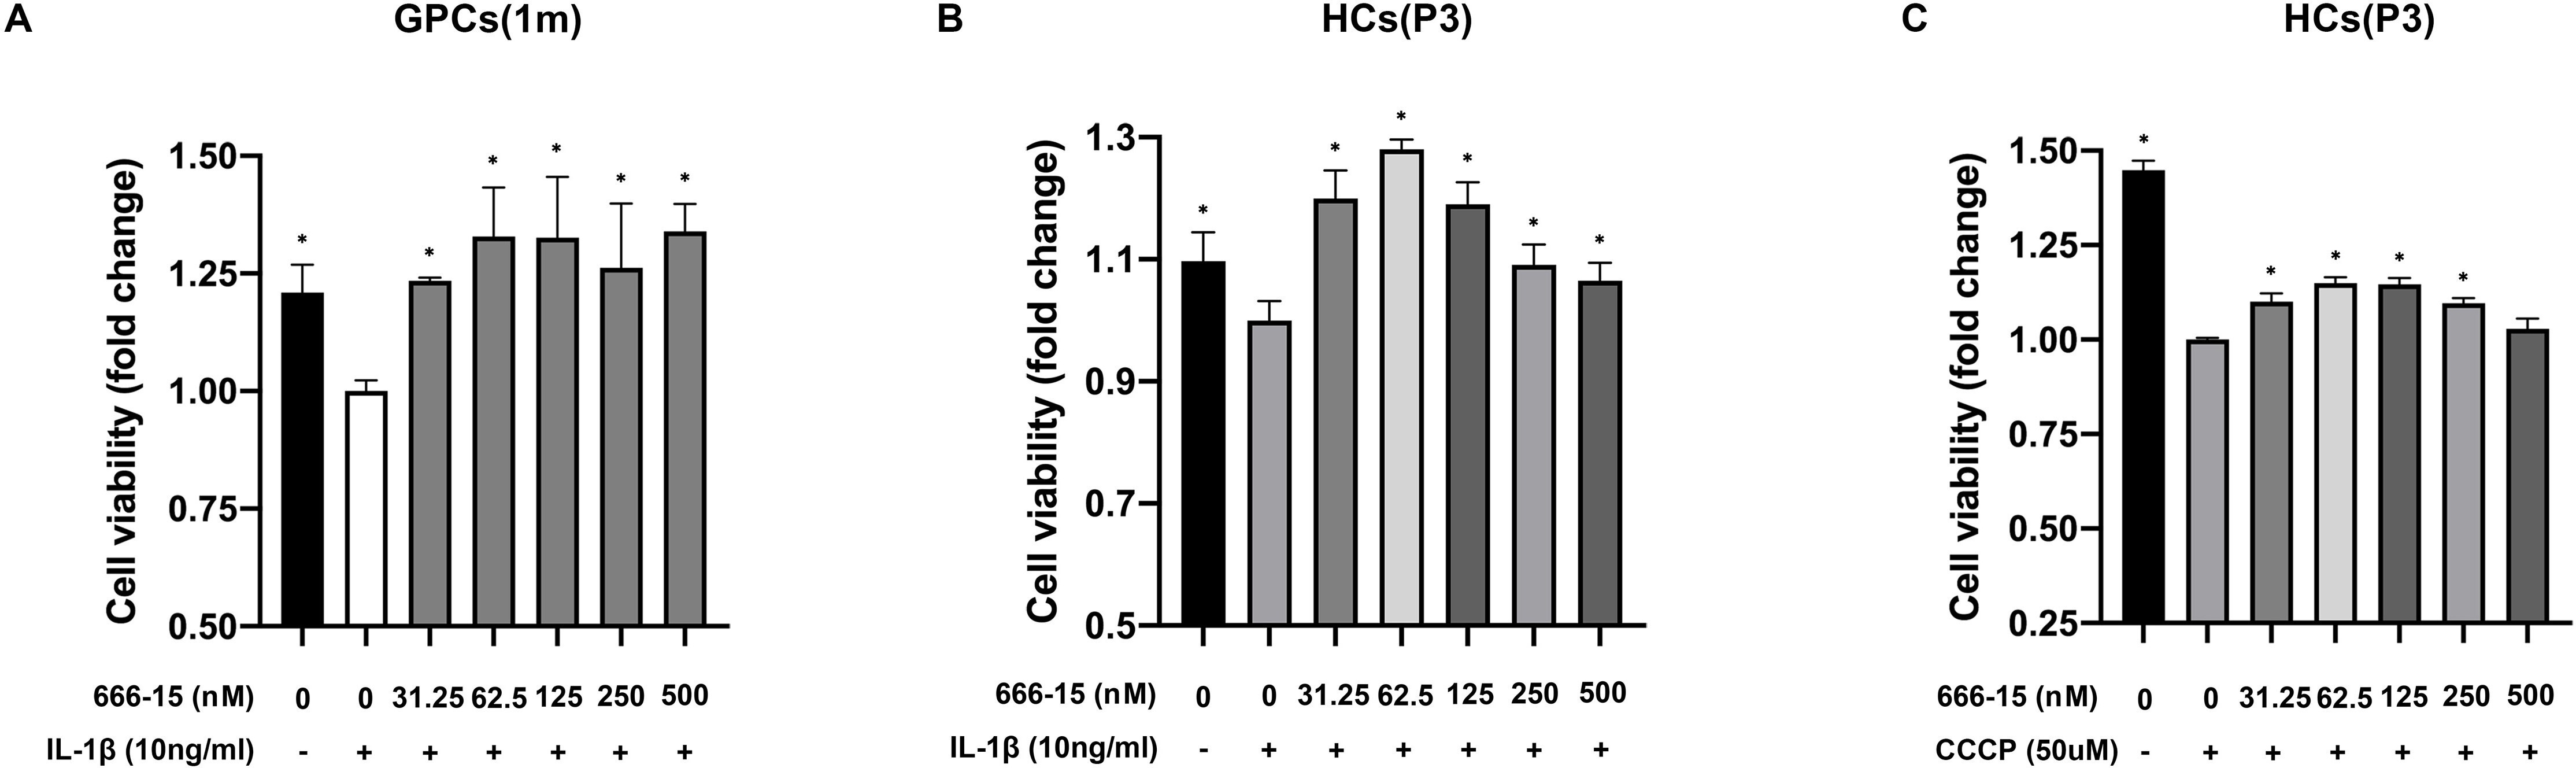 Fig. 4 
            666-15 alleviated IL-1β- or carbonyl cyanide 3-chlorophenylhydrazone (CCCP)-induced chondrocyte injury through inhibition of mitochondrial dysfunction-associated apoptosis. a) Chondrocytes obtained from one-month-old guinea pigs (GPCs (1 m)) (n = 3 in each group) were treated with different concentrations of 666-15 for two hours prior to IL-1β (10 ng/ml) treatment for 24 hours. Cell counting kit-8 (CCK-8) assay was performed to assess cell viability. b) to c) Human chondrocytes (HCs) of P3 (n = 3 in each group) were treated with different concentrations of 666-15 for two hours prior to b) IL-1β (10 ng/ml) or c) CCCP (50 μM) treatment for 24 hours. Cell viability was assessed using the CCK-8 assay. One-way analysis of variance was used to compare means among groups, and the Fisher’s least significance difference test was used for multiple comparisons. *p < 0.05, ***p < 0.001.
          